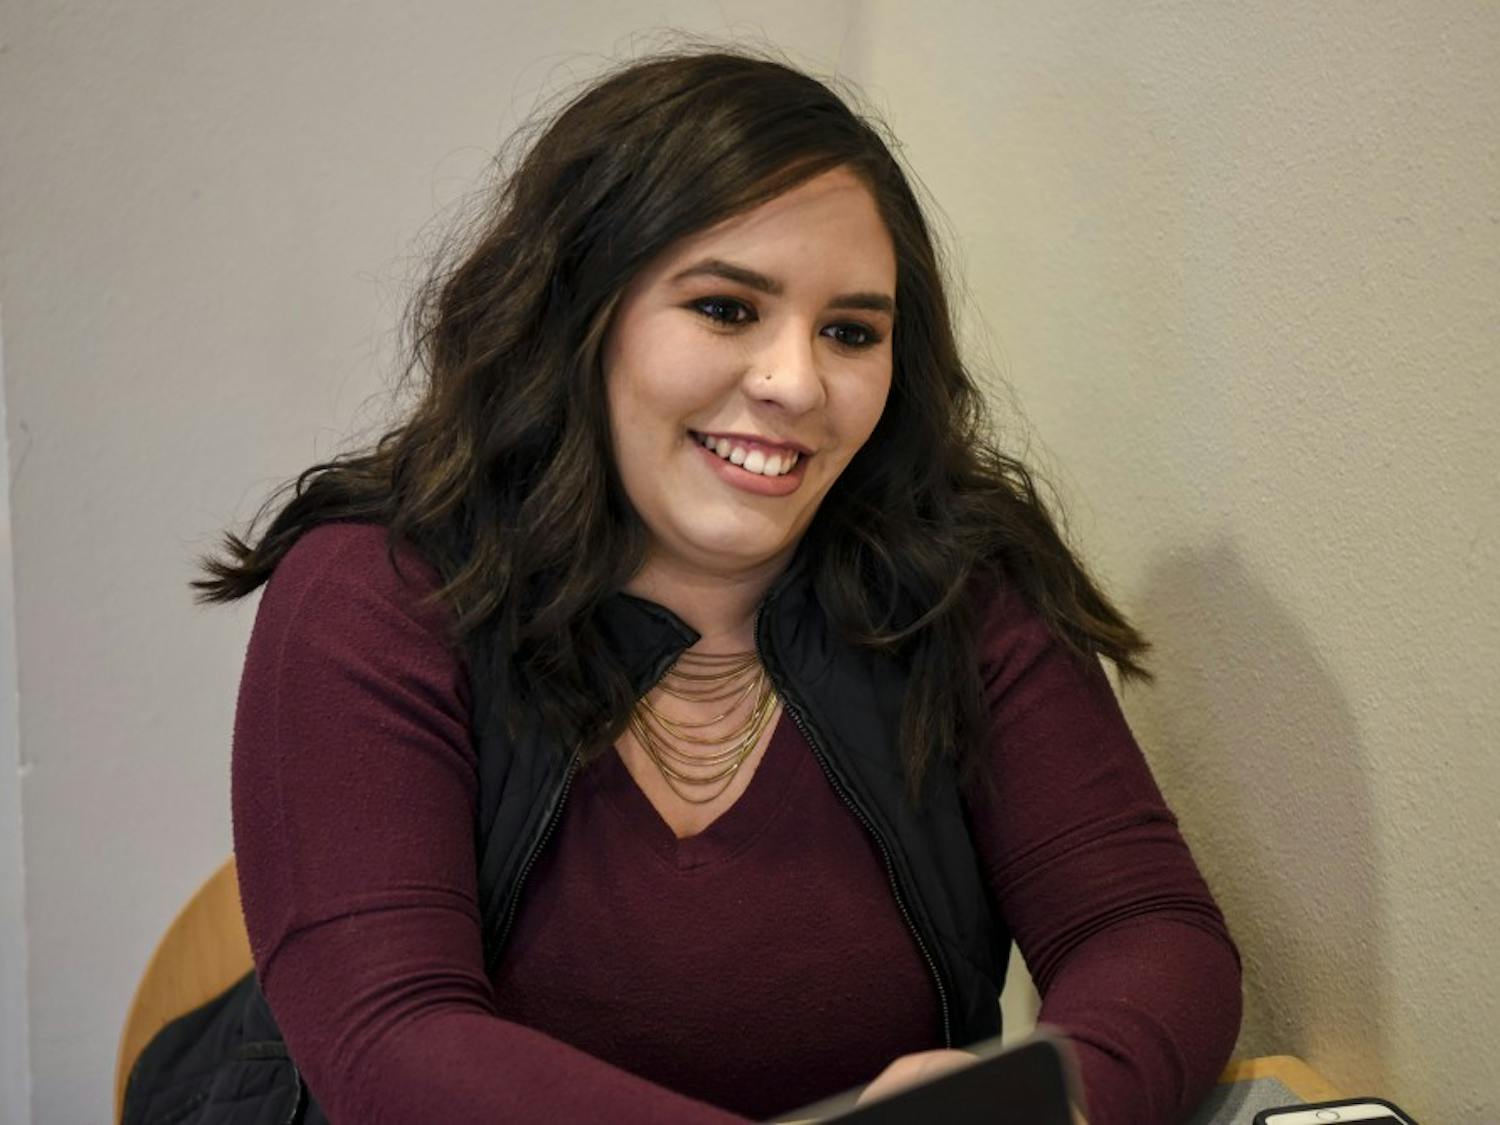 Elizabeth Laydon sitis in the Student Union Building on Dec. 8, 2017. She is graduating after five years, some of which she worked for the Southwest Film Center for mid-week movies.  